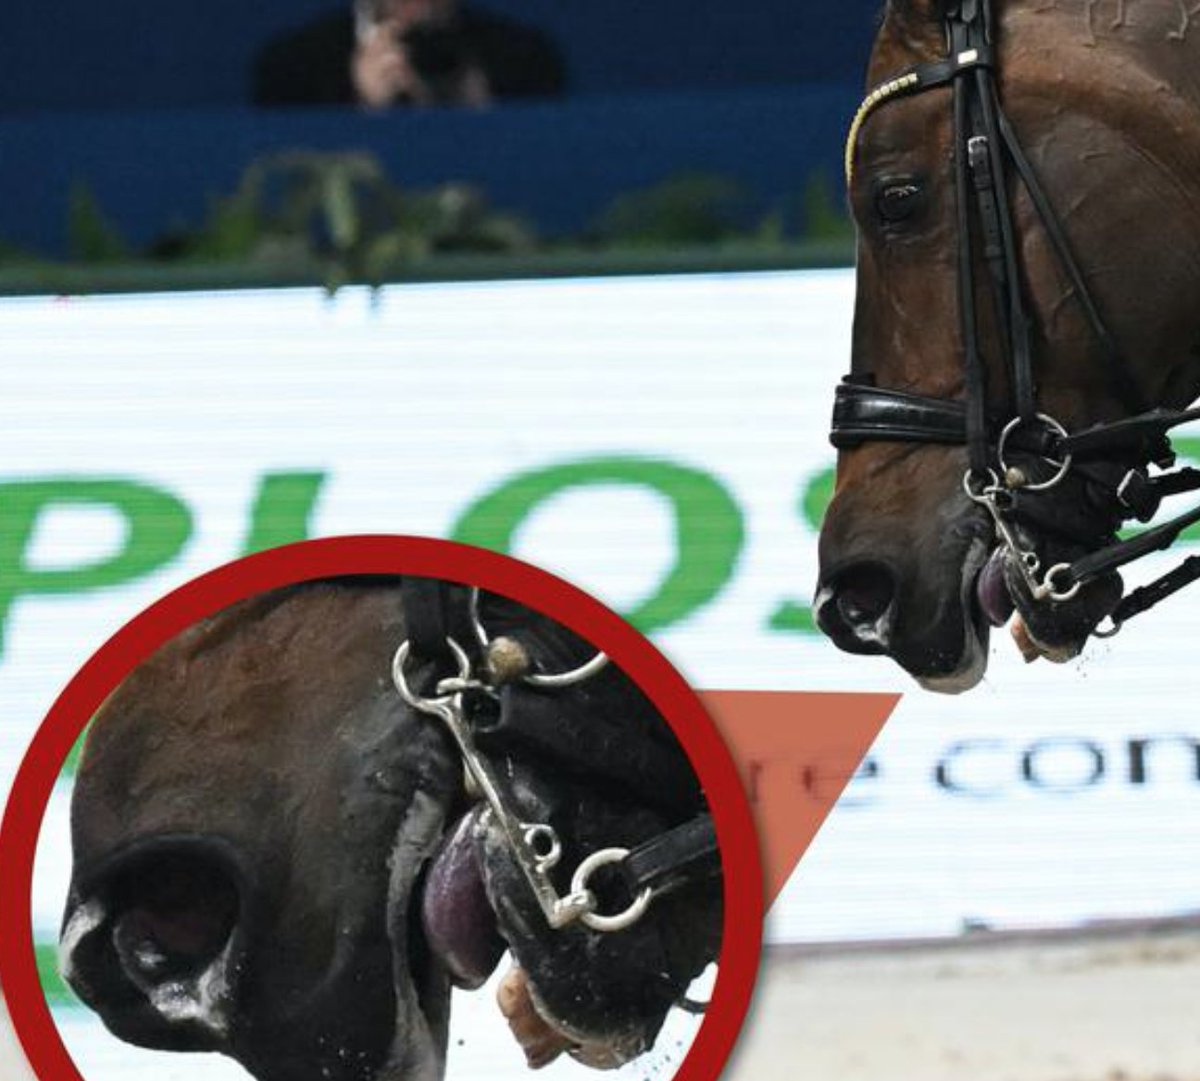 Painful, black-blue, hypoxic tongues the colour of gangrene are what you have to look forward to if you have tickets for the #Dressage at the #ParisOlympics - the FEI not only allows but actually rewards this now tinyurl.com/mvbstvpb @guardian @TheEconomist